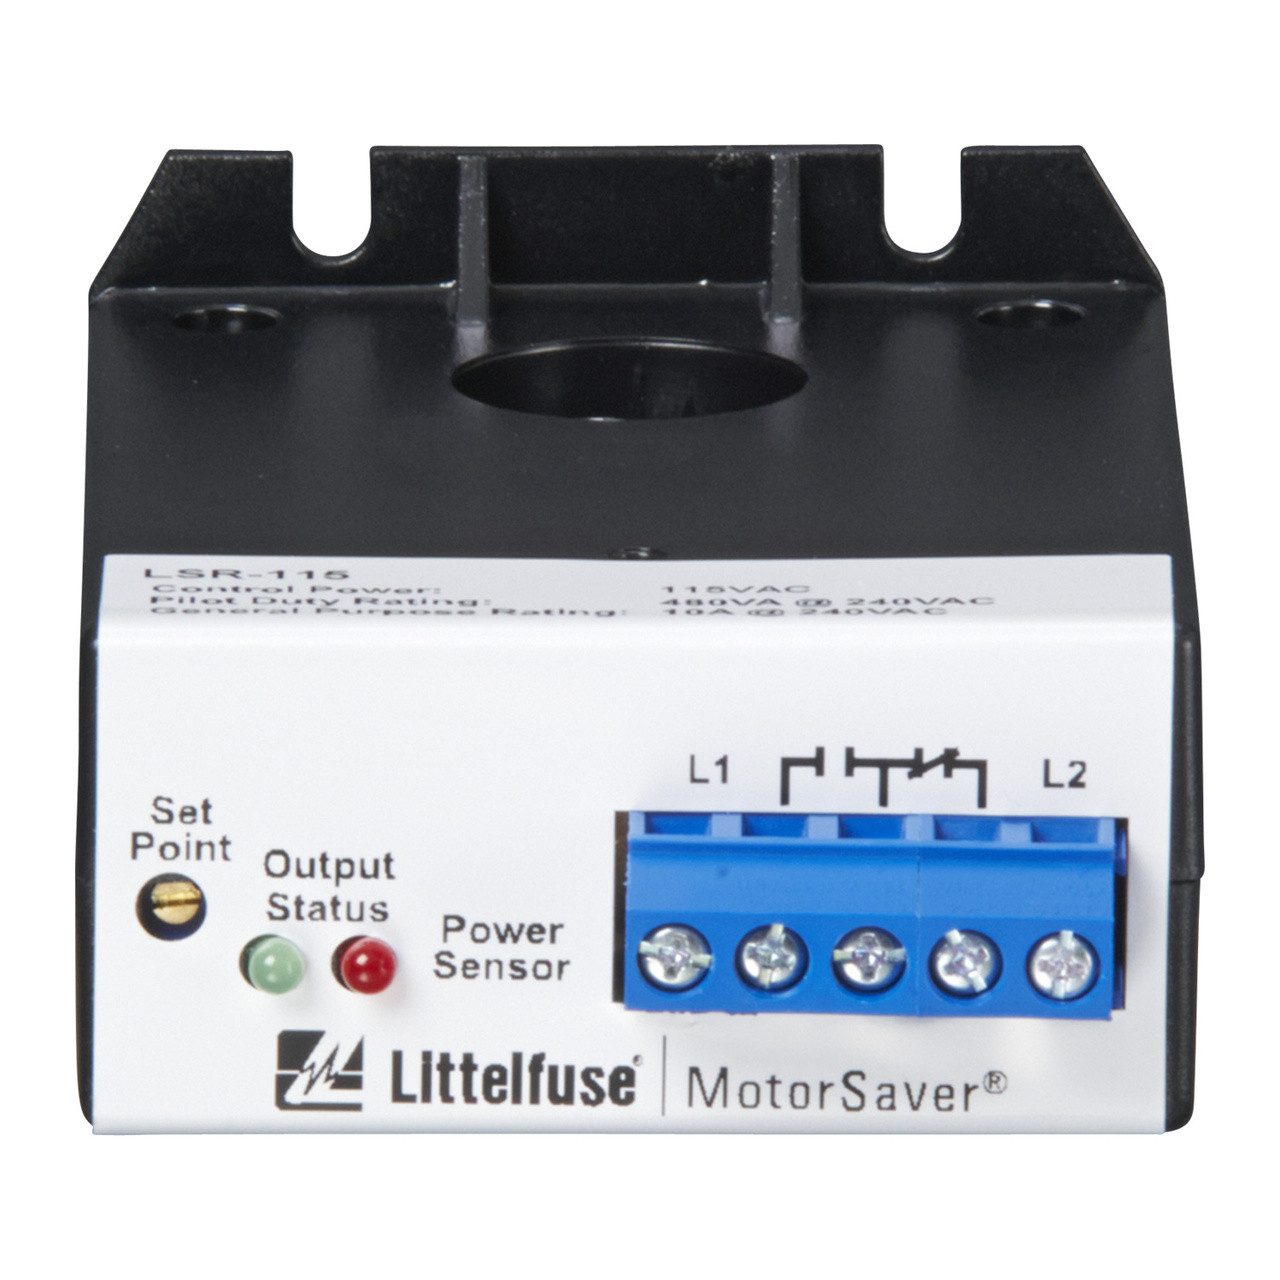 Littelfuse-Symcom LSR-230 Current Monitor Relays